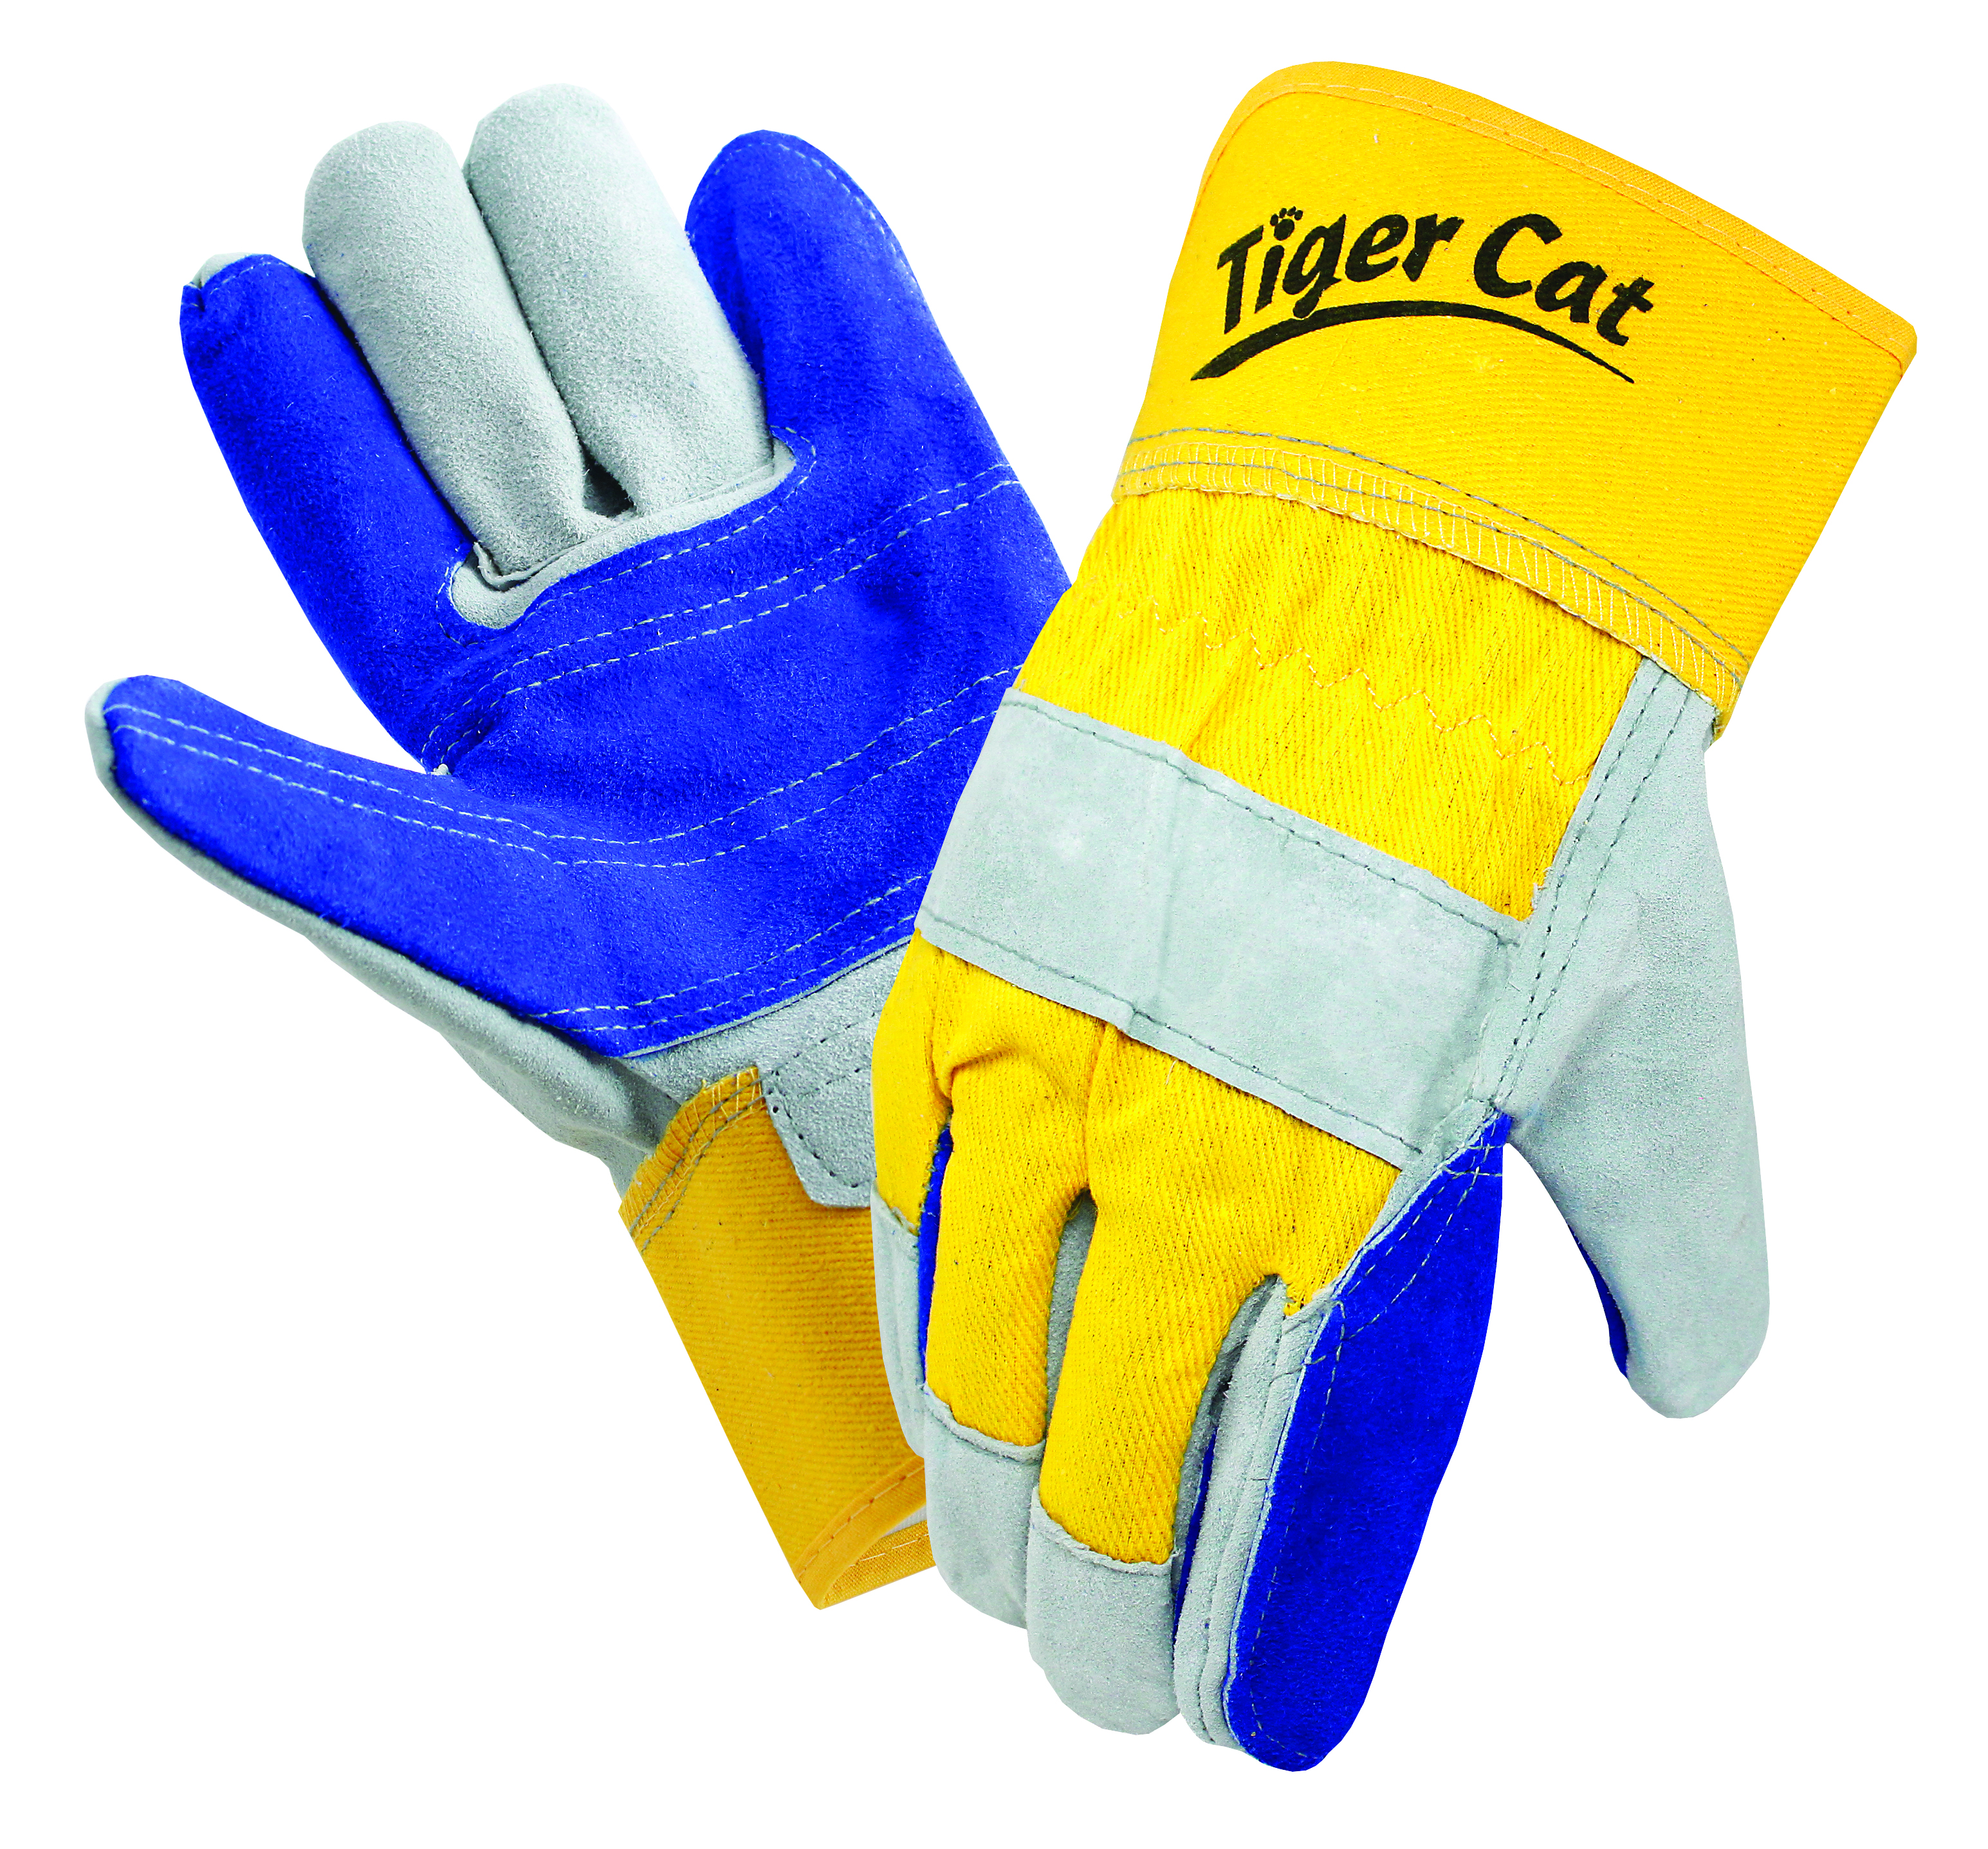 Tiger Cat&trade; Premium Leather Double Palm Gloves w/ Safety Cuff, 1 Pair